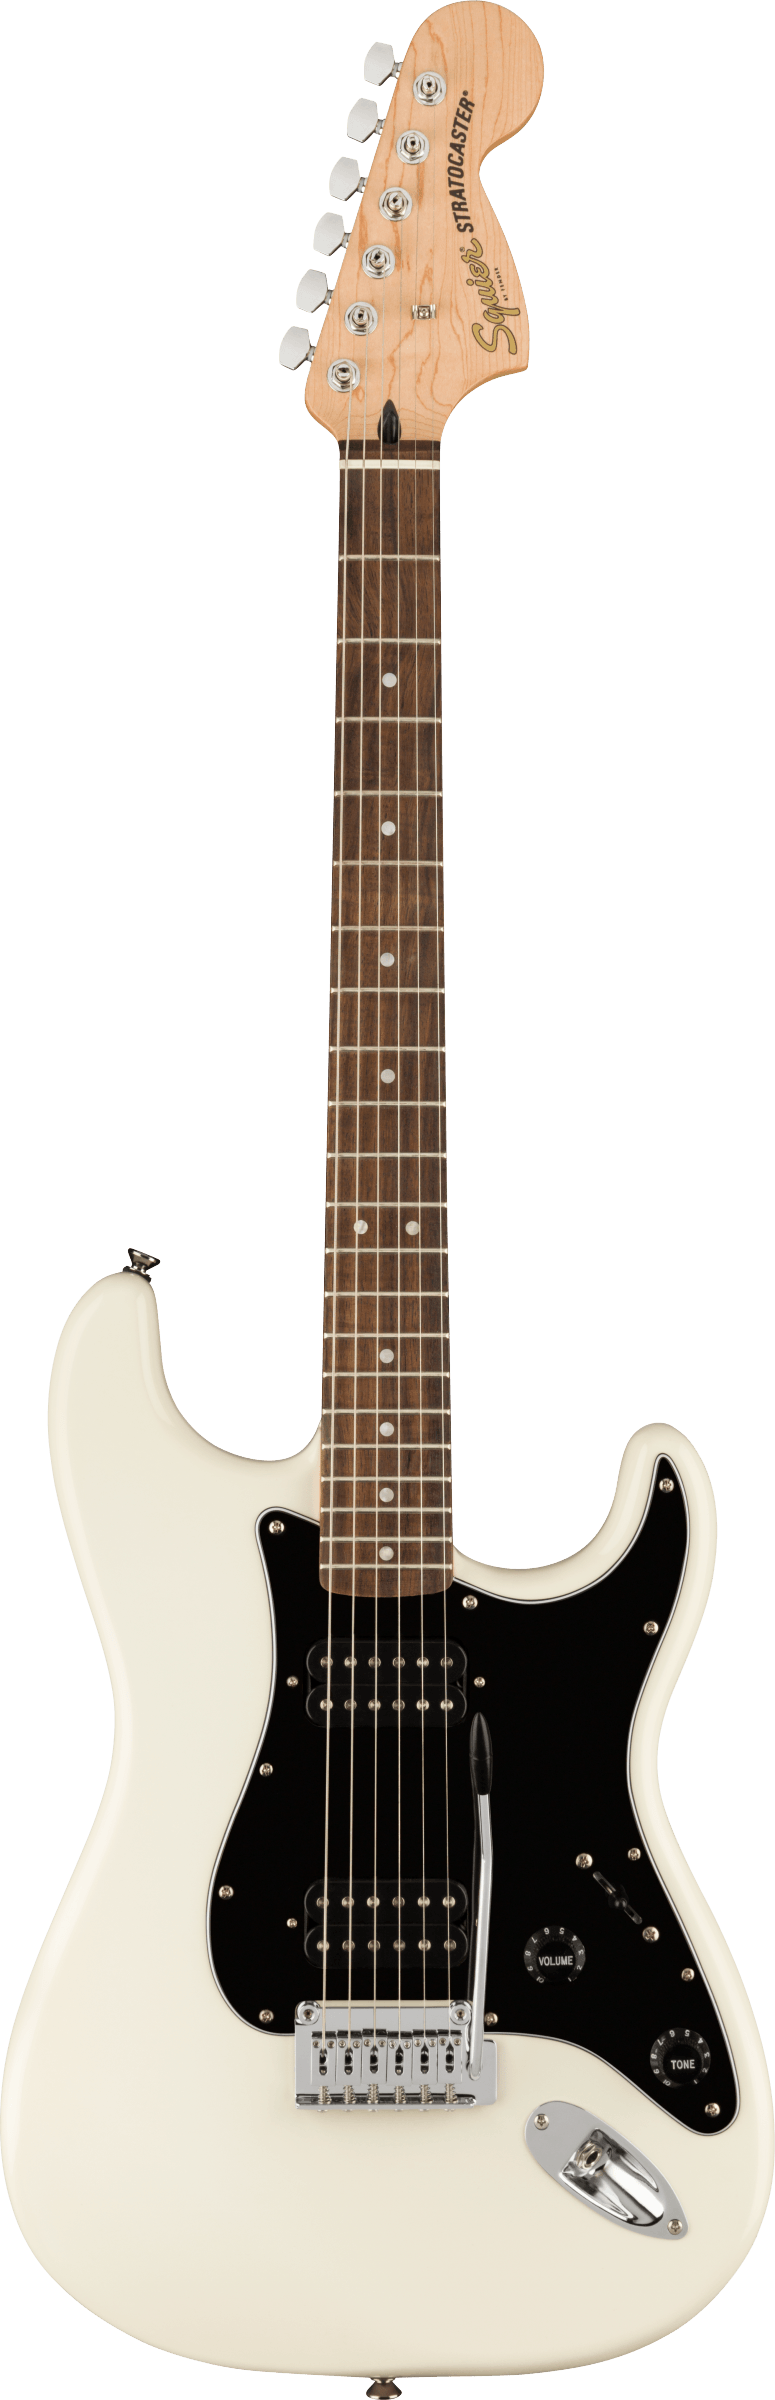 Squier Affinity Series Stratocaster HH Electric Guitar in Olympic Whit